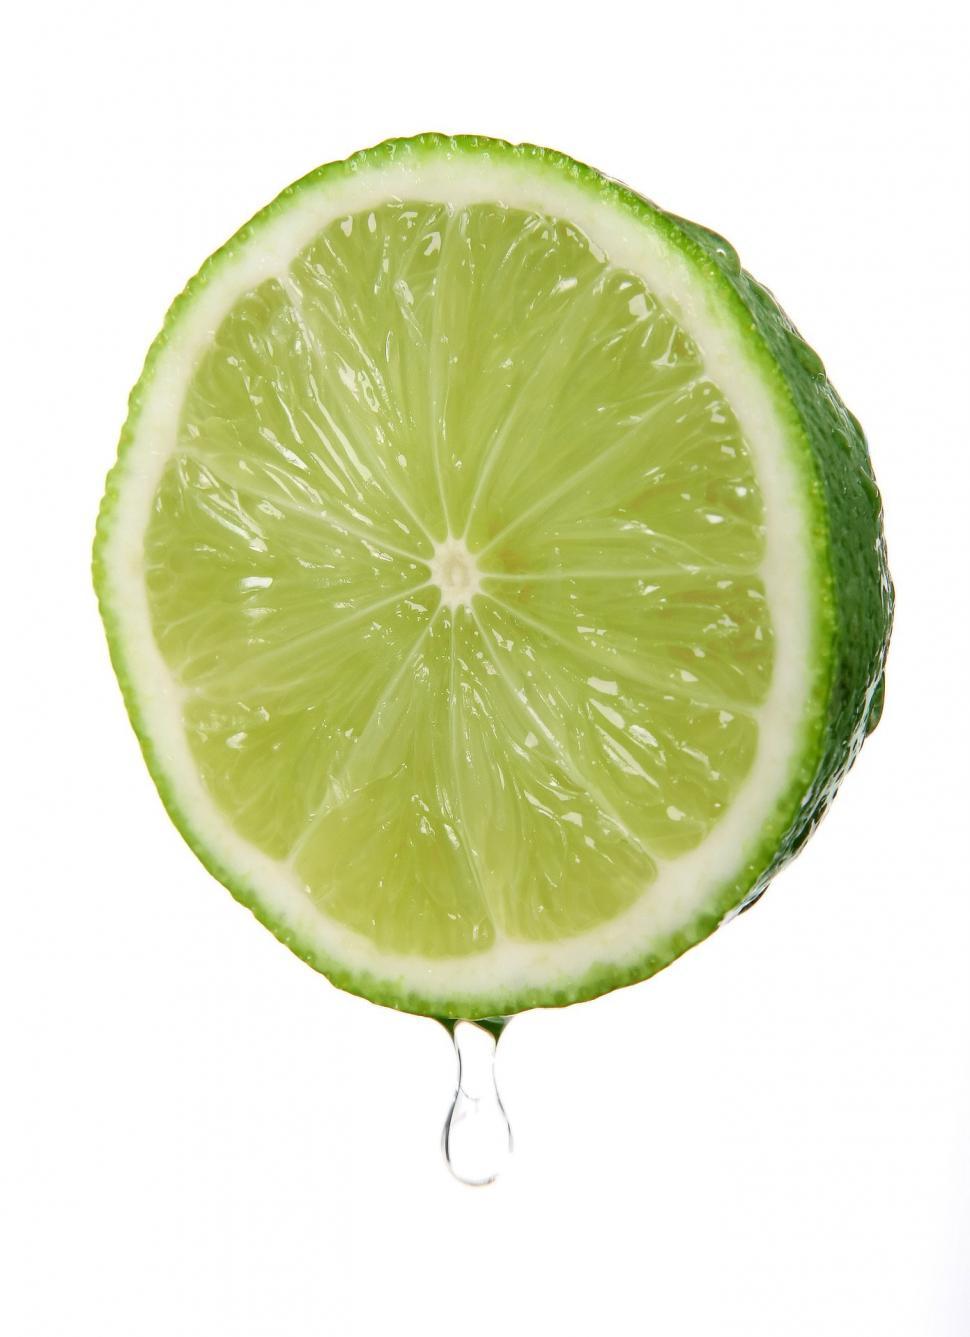 Free Image of Refreshing Slice of Lime With Water Droplets 